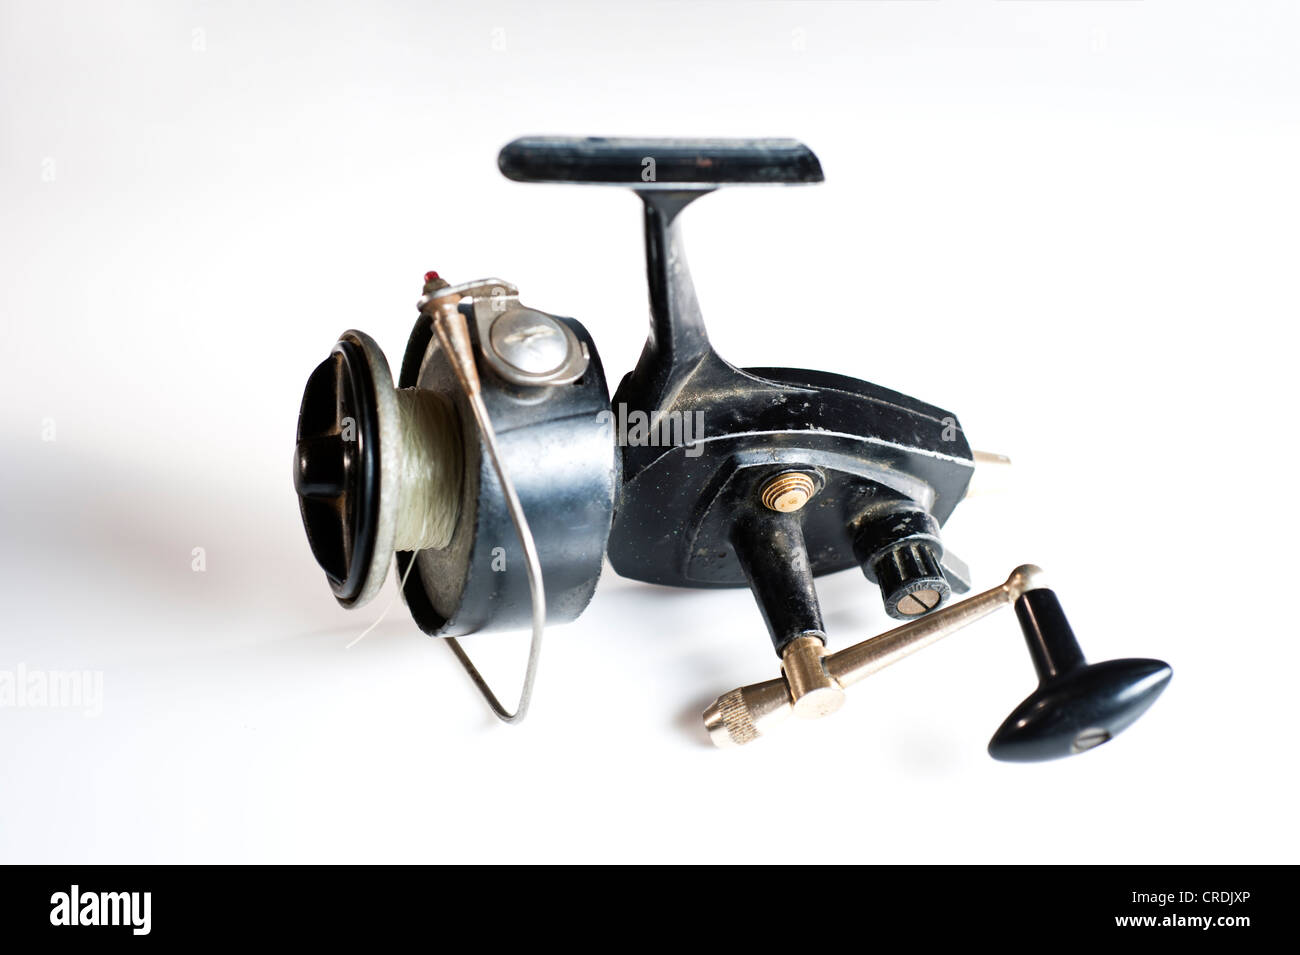 Old Automatic Retrieve Fly Fishing Reel On White Stock Photo